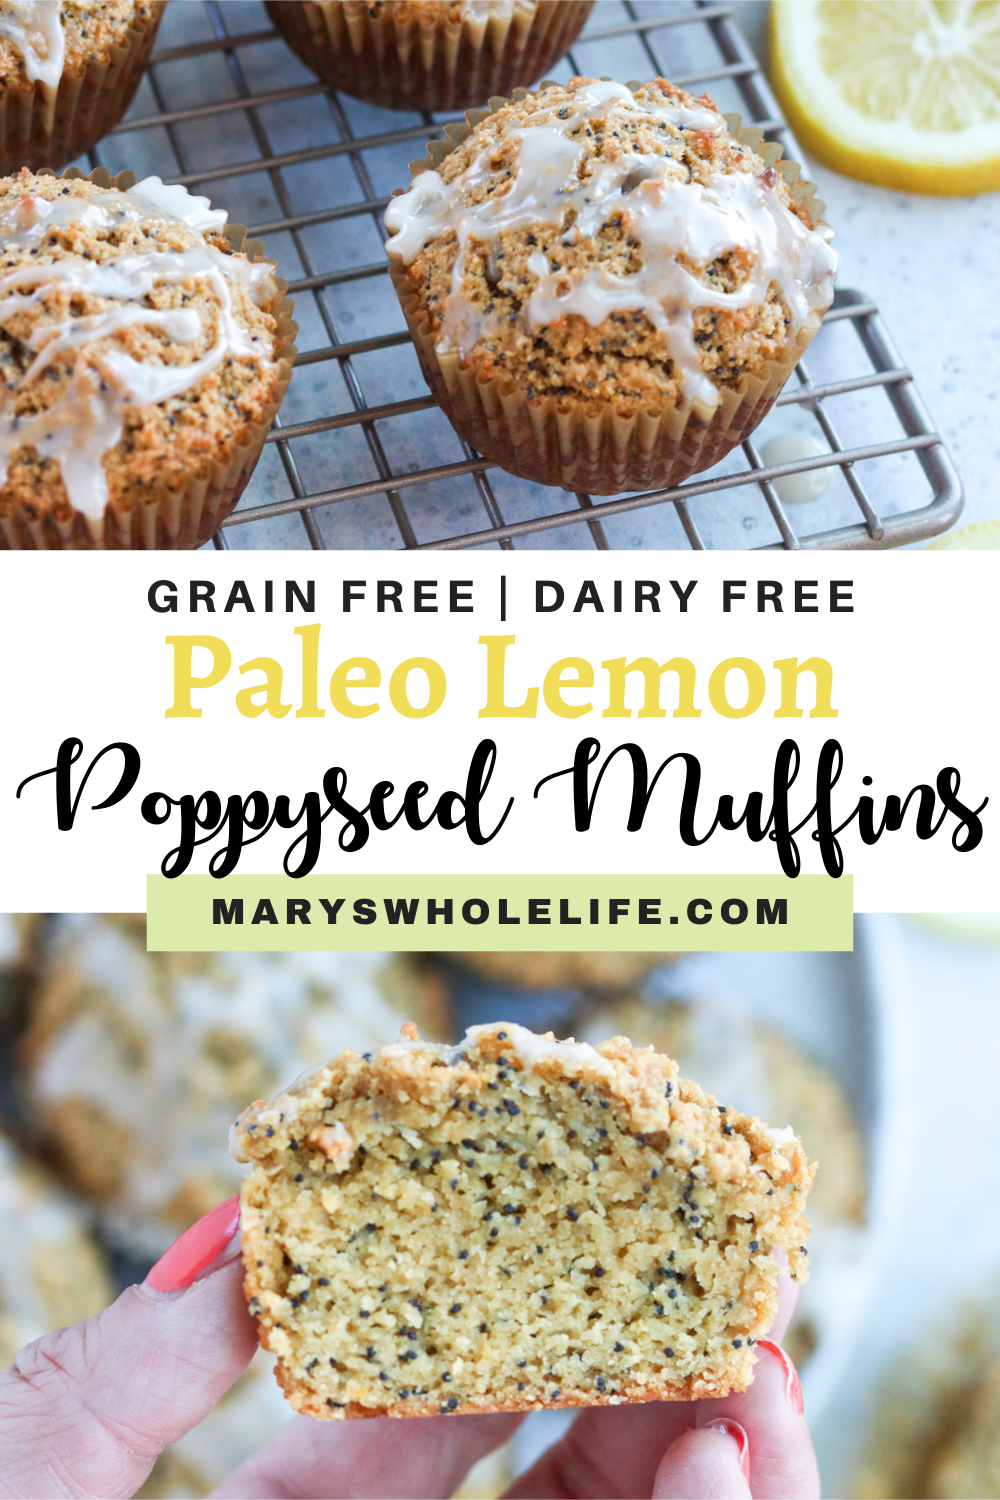 blog cover with muffins and text